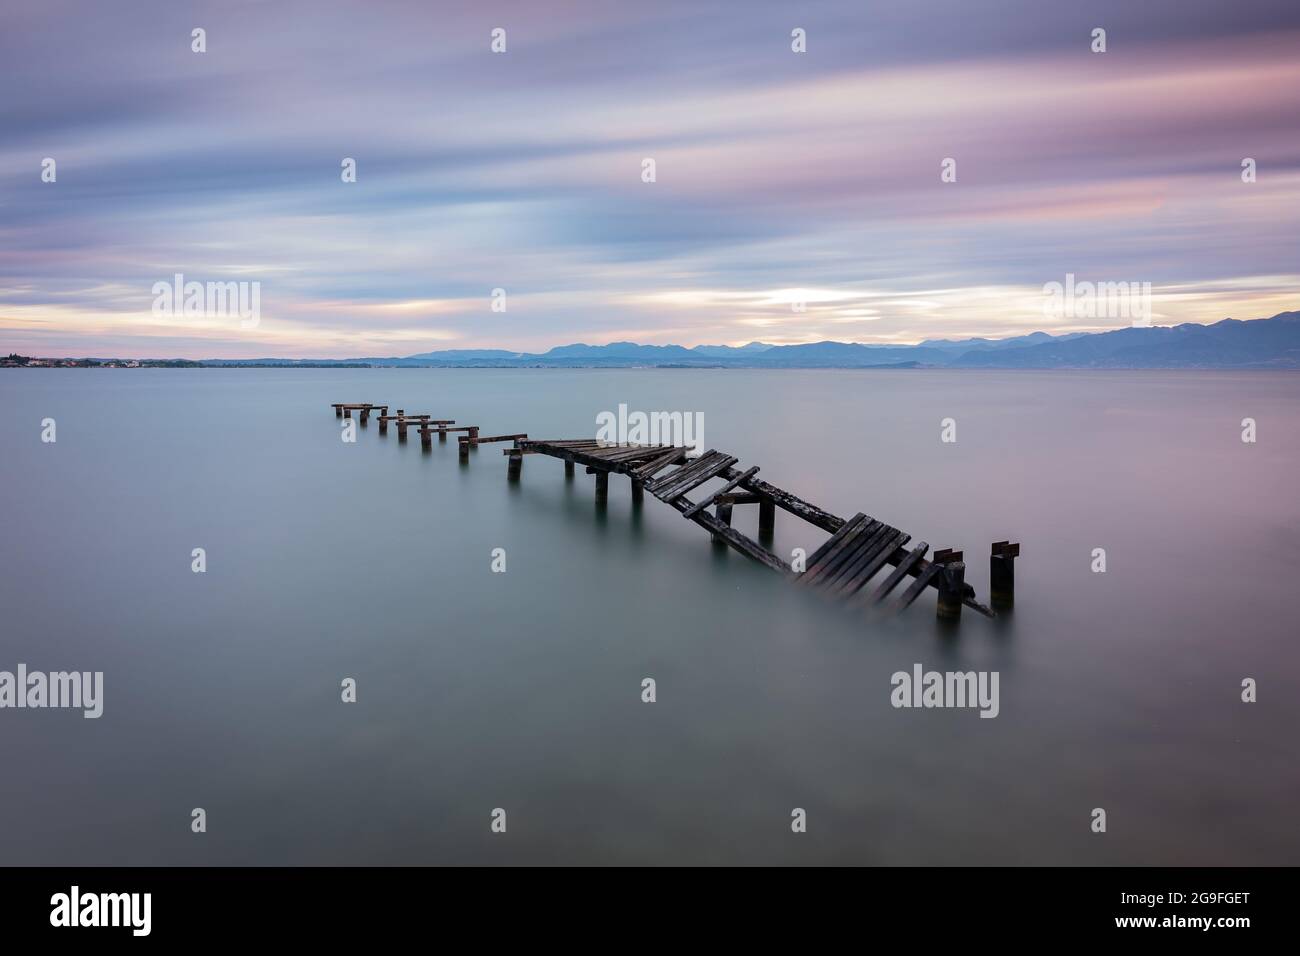 Abandoned wooden pier in lake during sunrise, long exposure Stock Photo